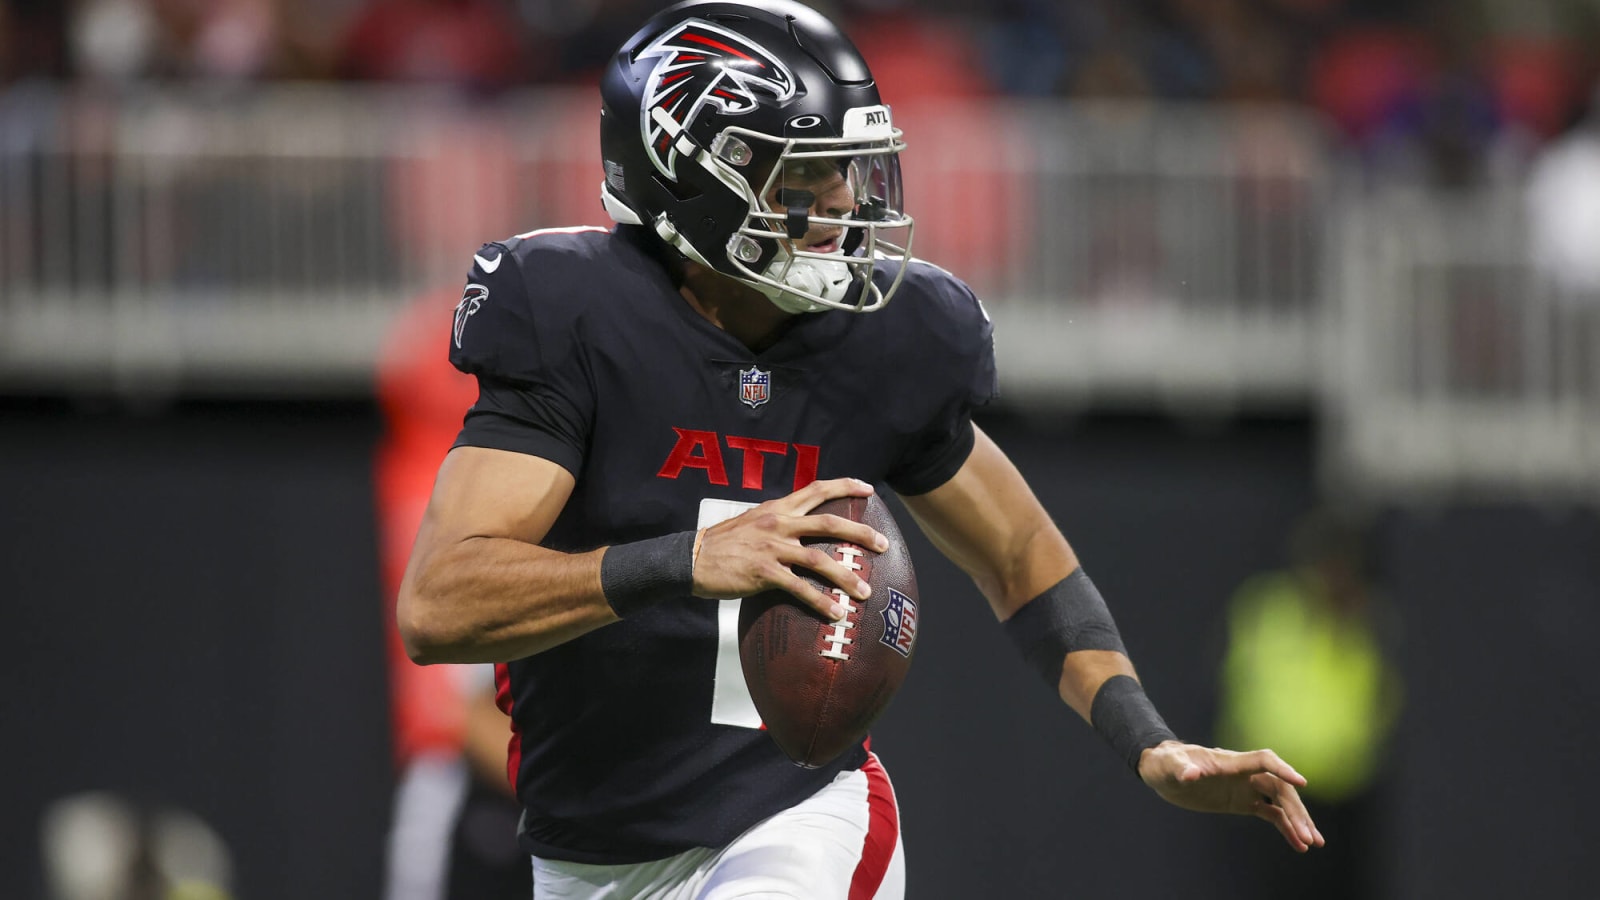 Falcons QB Marcus Mariota has best deal in NFL this year and next year